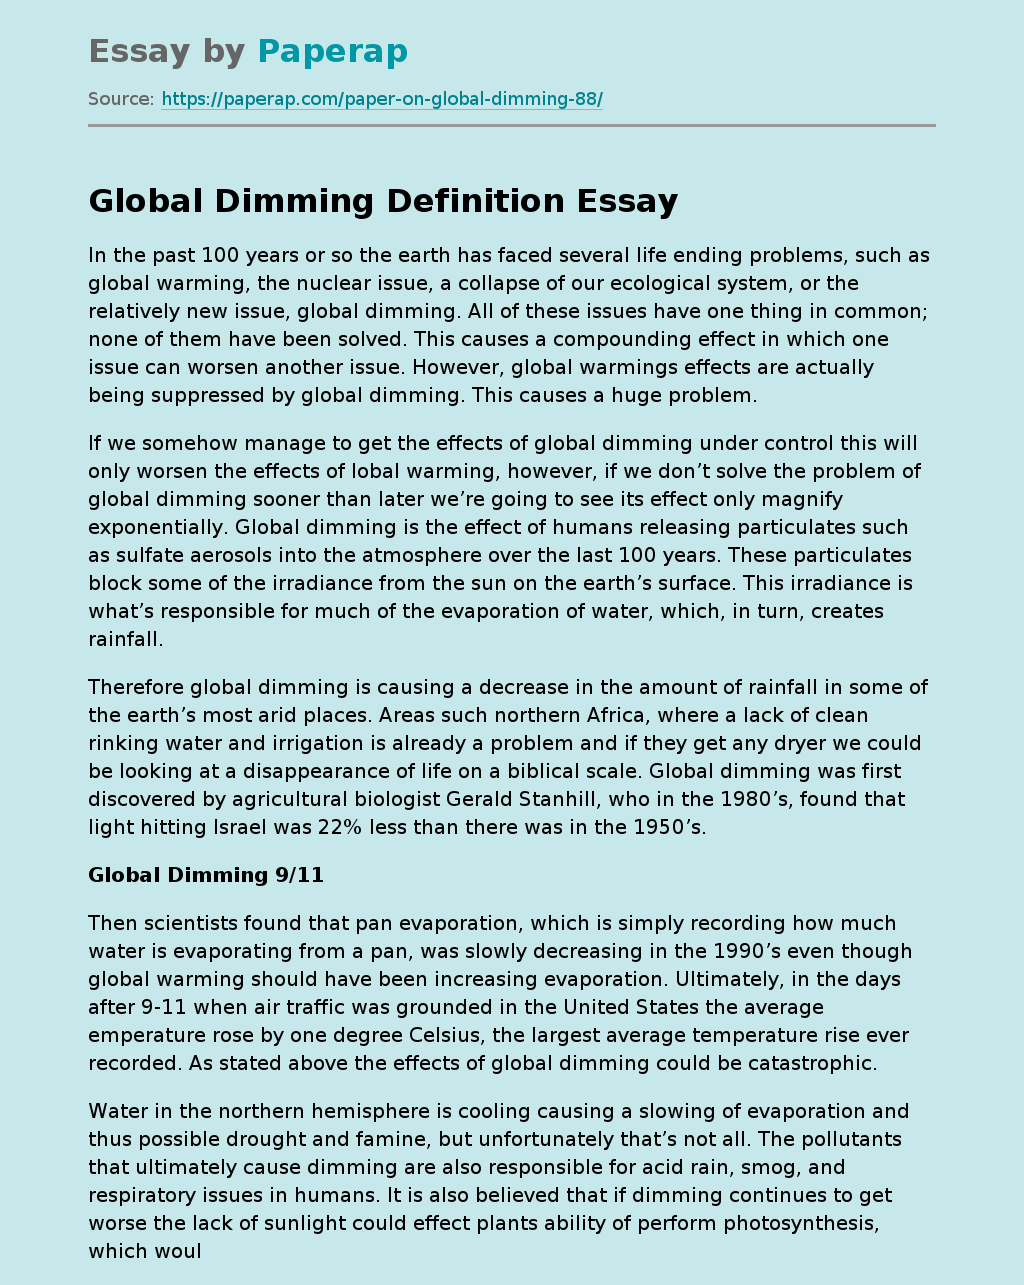 Global Dimming Definition